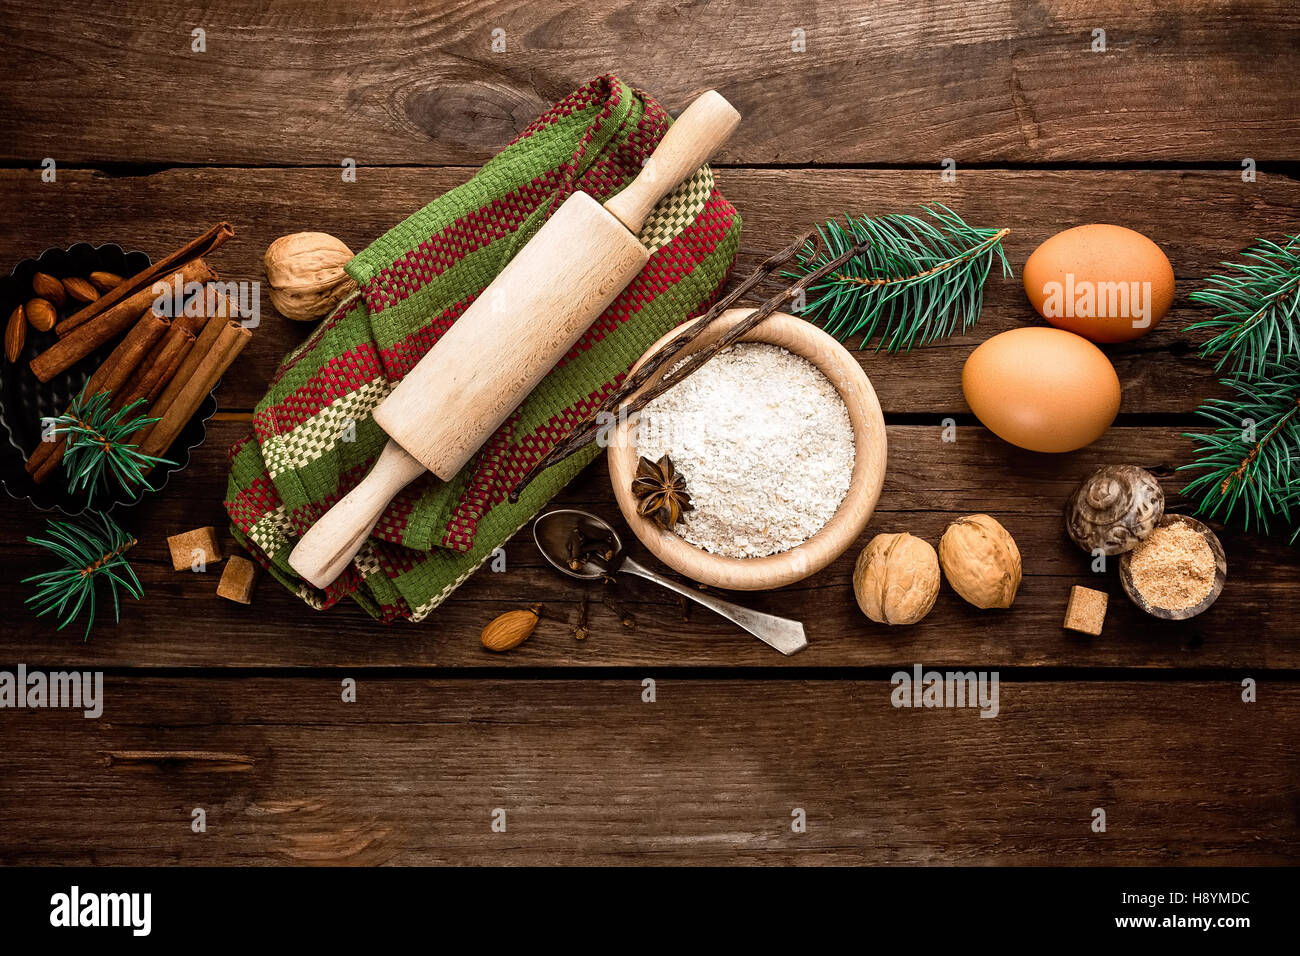 https://c8.alamy.com/comp/H8YMDC/culinary-background-for-recipe-of-christmas-baking-H8YMDC.jpg